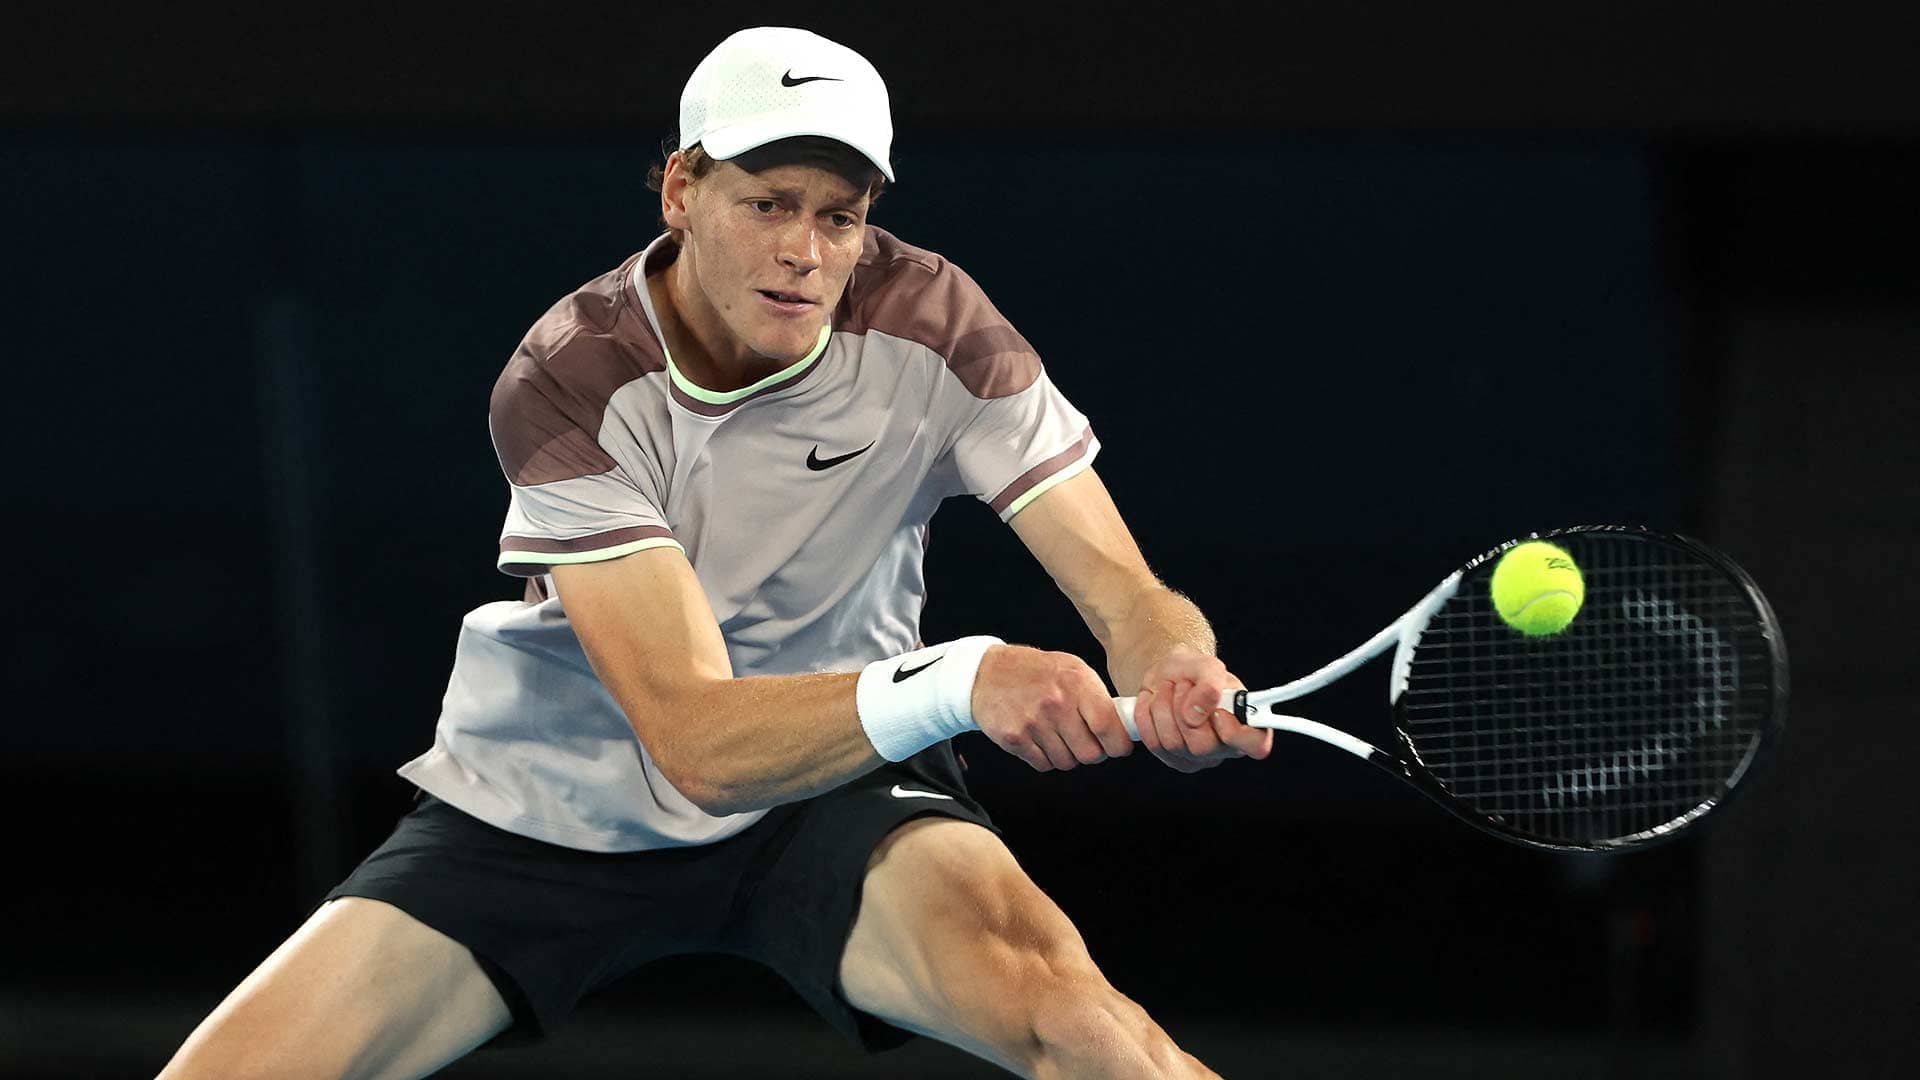 Jannik Sinner in action against Andrey Rublev on Tuesday at the Australian Open.